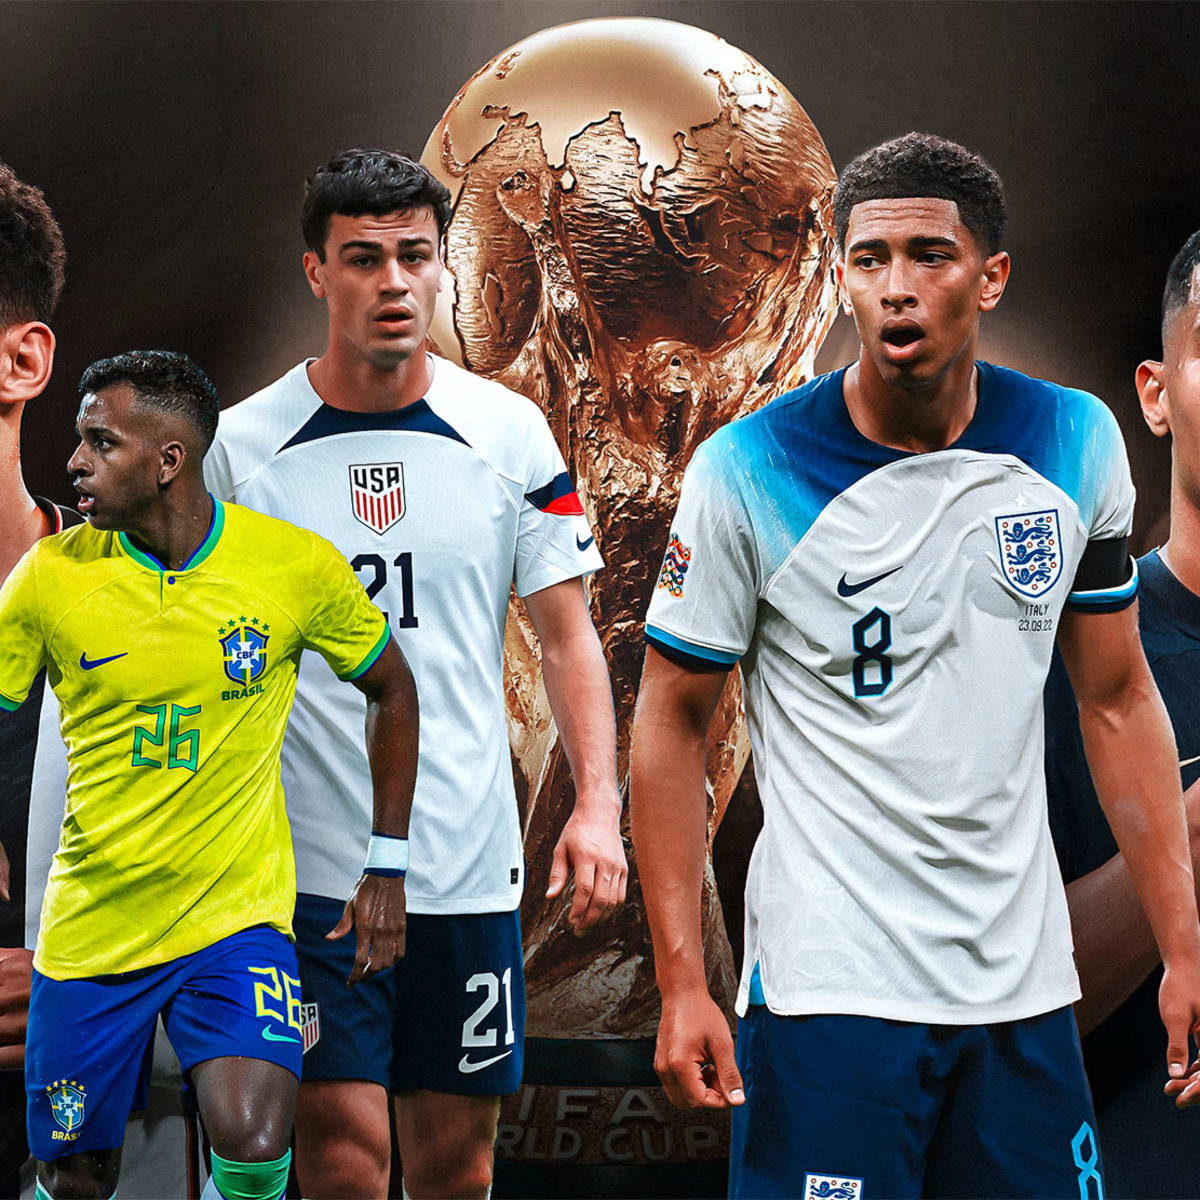 The most handsome players at the 2022 FIFA World Cup (according to one of  our writers)